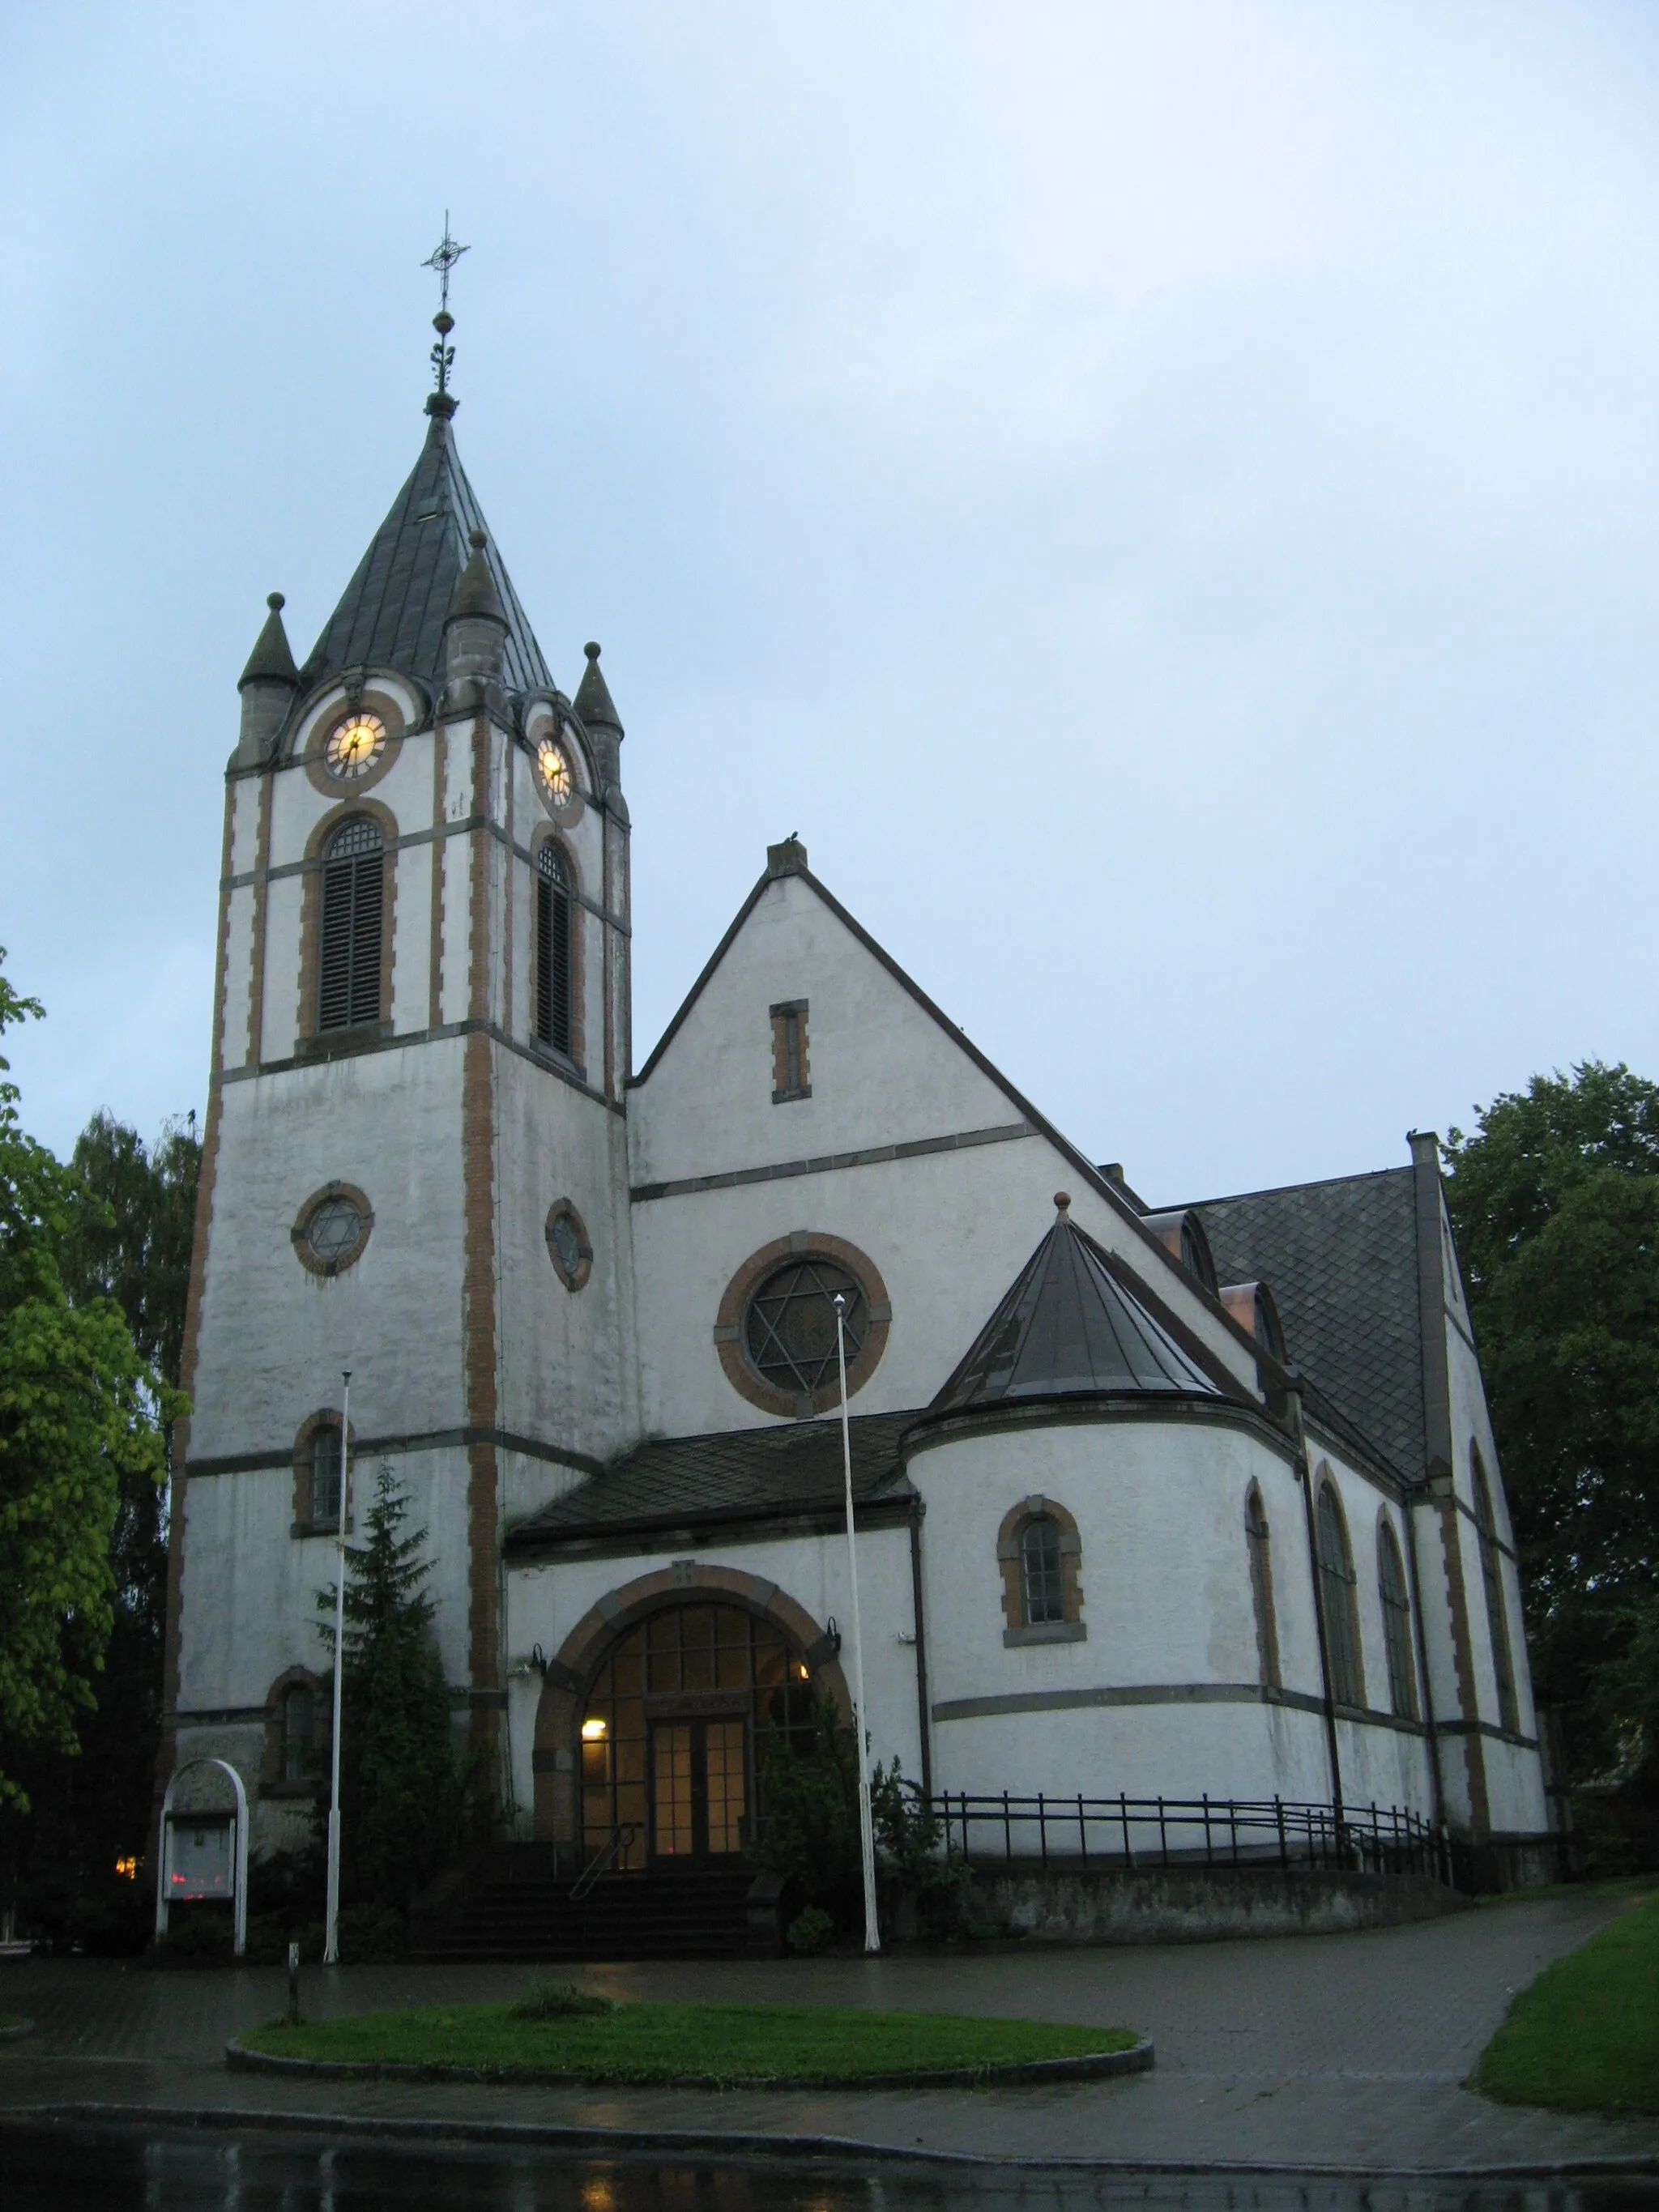 Photo showing: The church in Levanger, Norway. Photo taken by Alan Ford 2006-09-02.